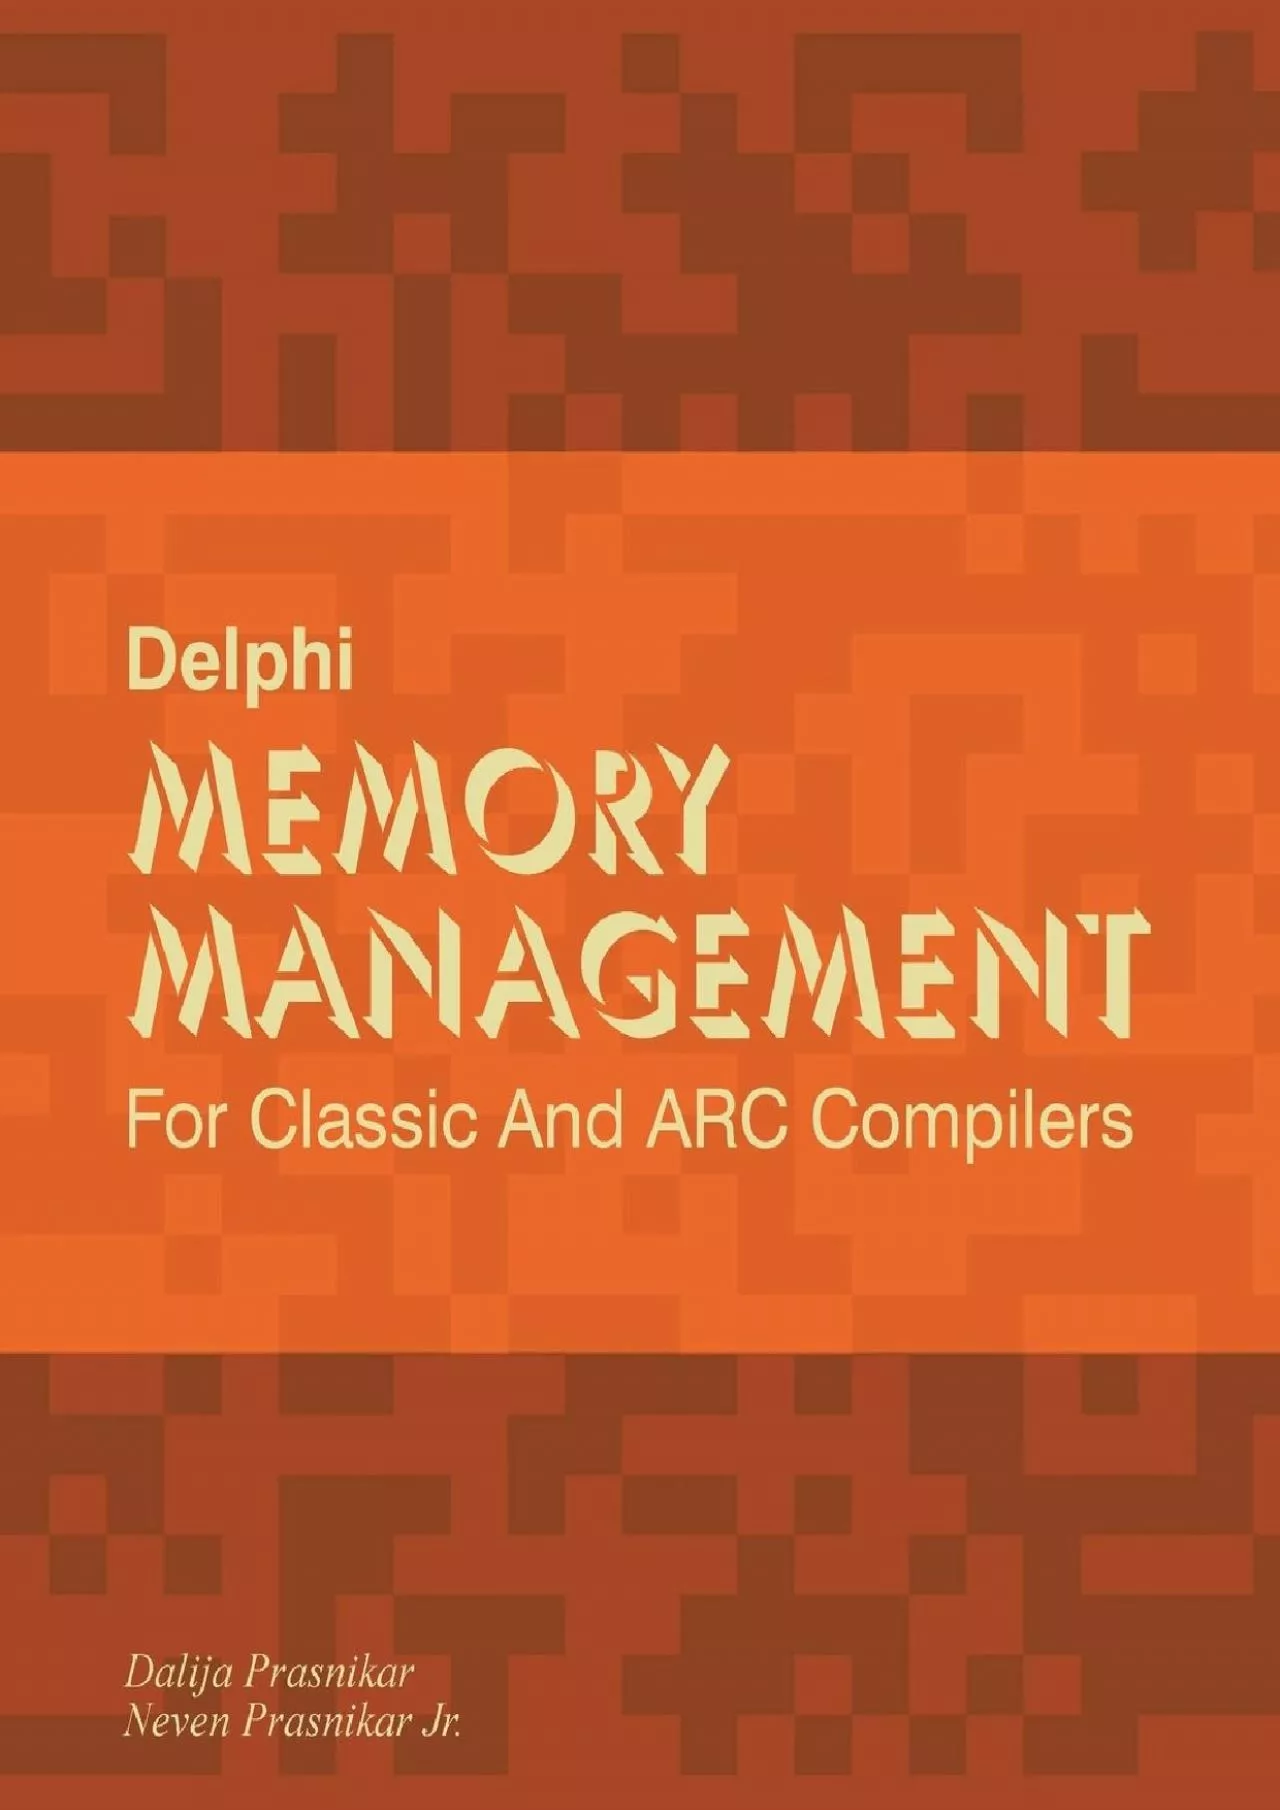 [READING BOOK]-Delphi Memory Management: For Classic And ARC Compilers[READING BOOK]-Delphi